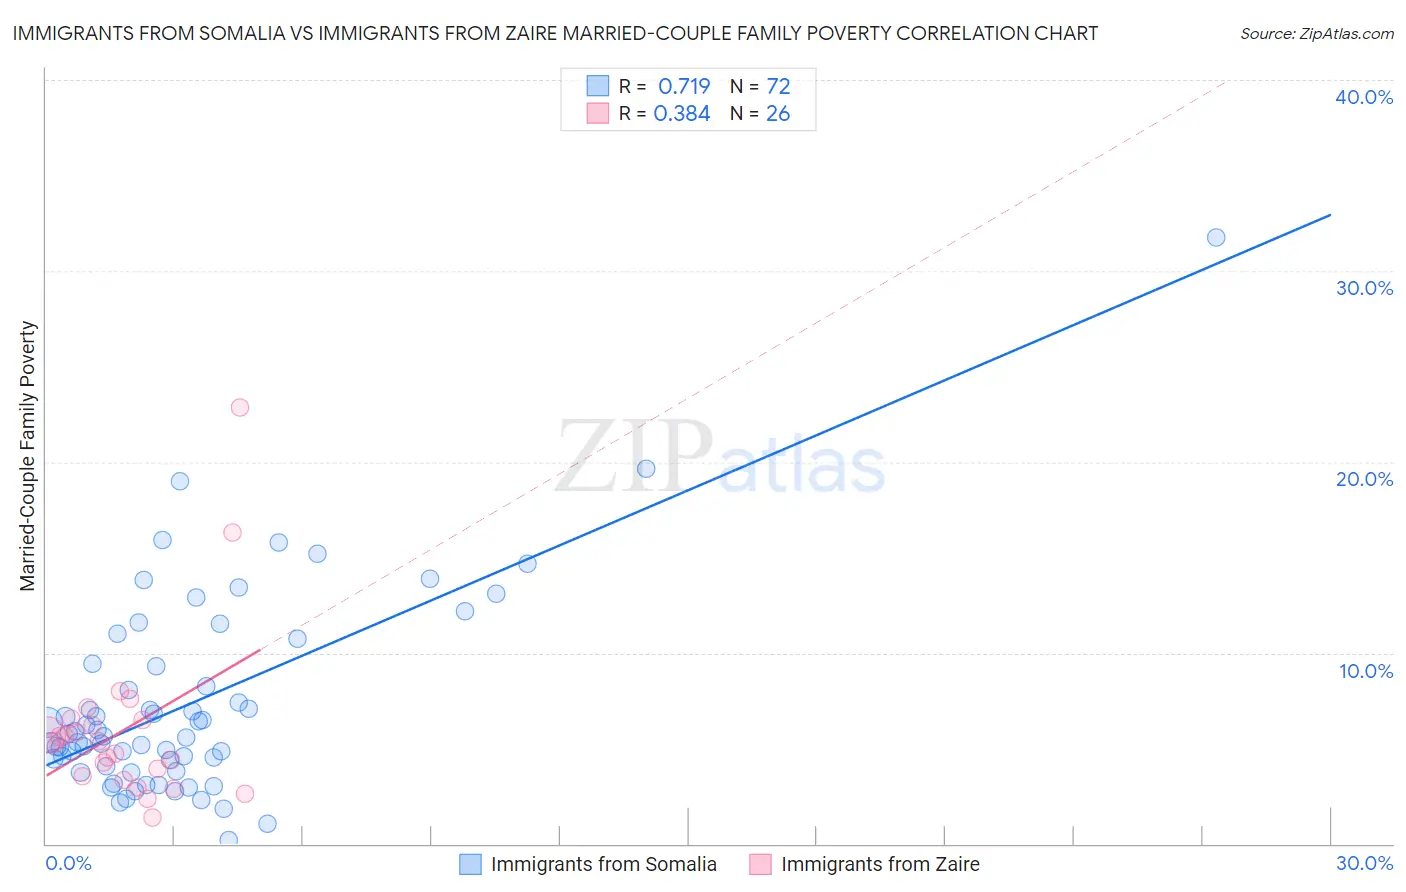 Immigrants from Somalia vs Immigrants from Zaire Married-Couple Family Poverty